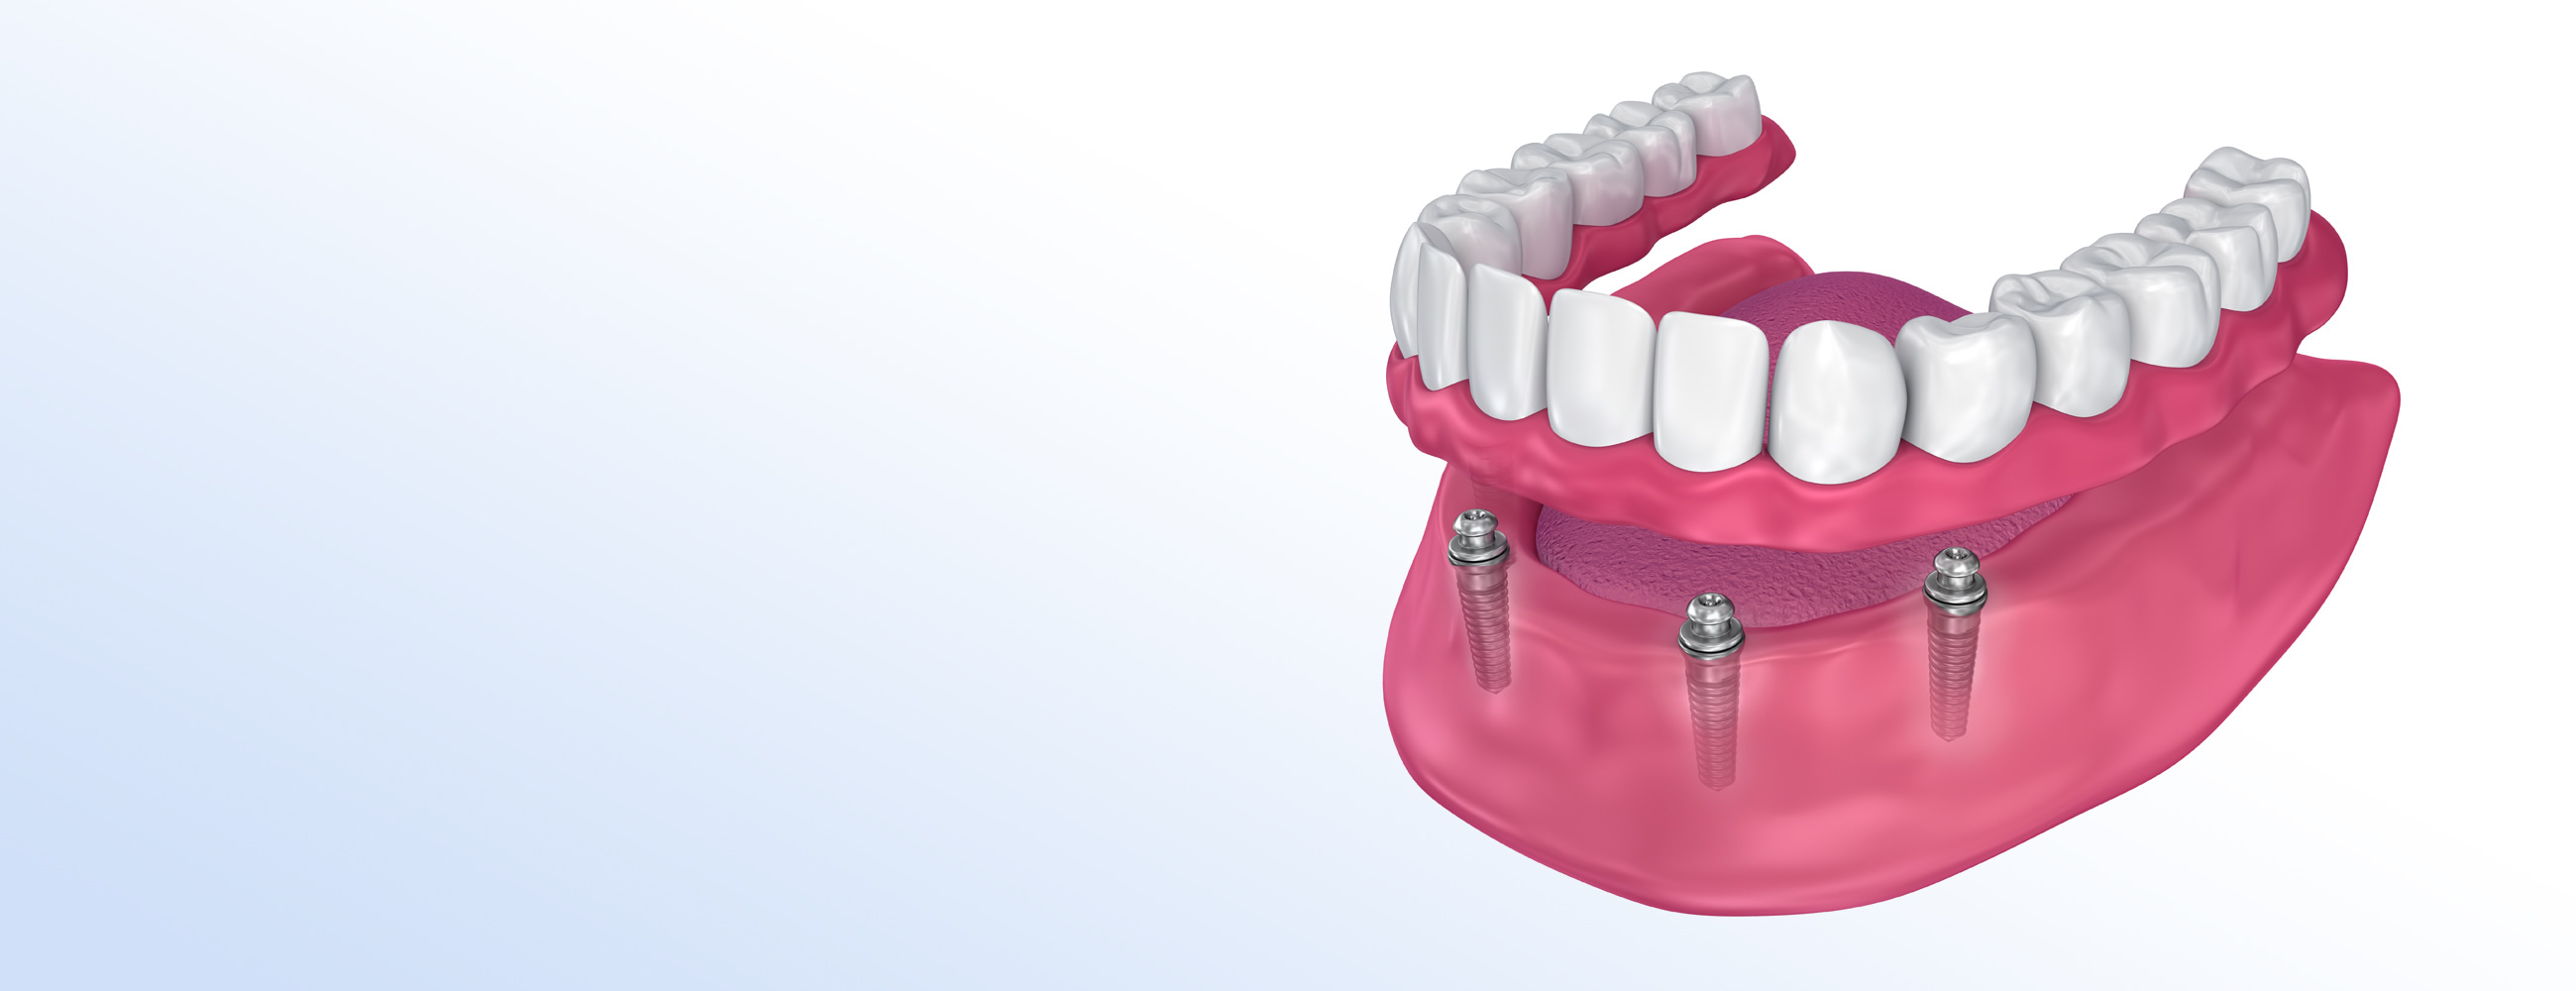 Implant Dentures at Forest House Dental in Leicester